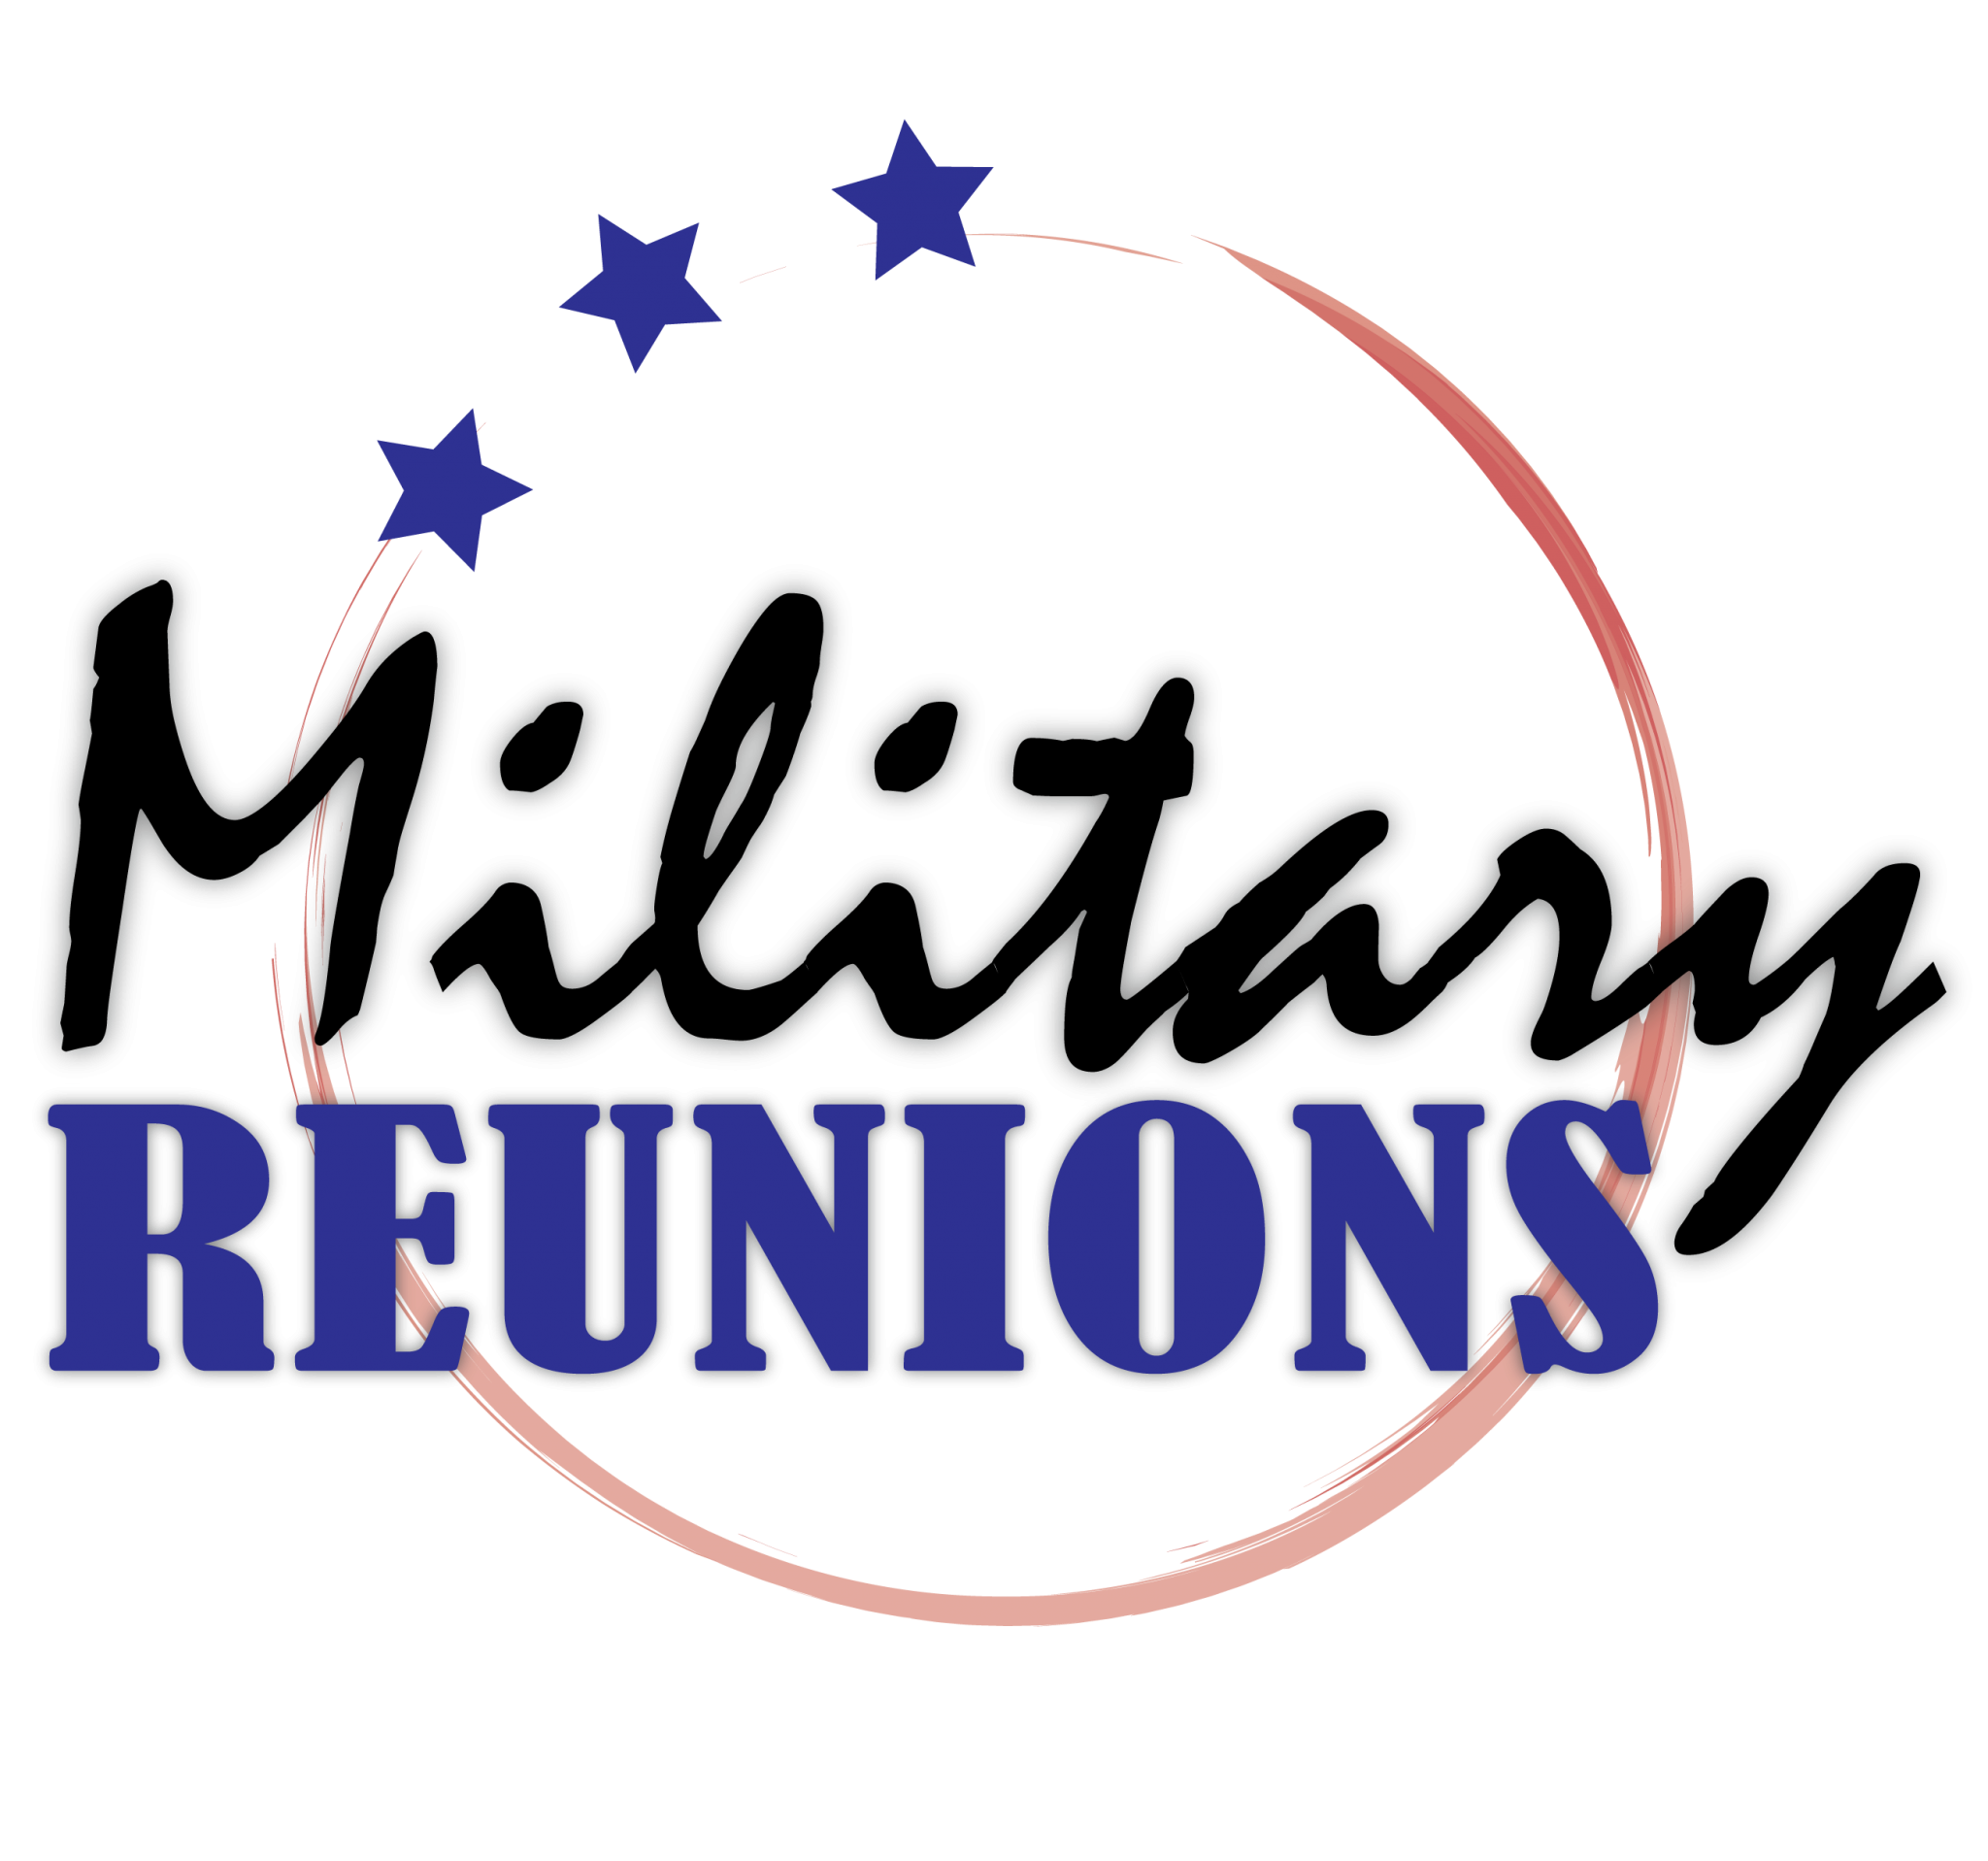 Military Reunions